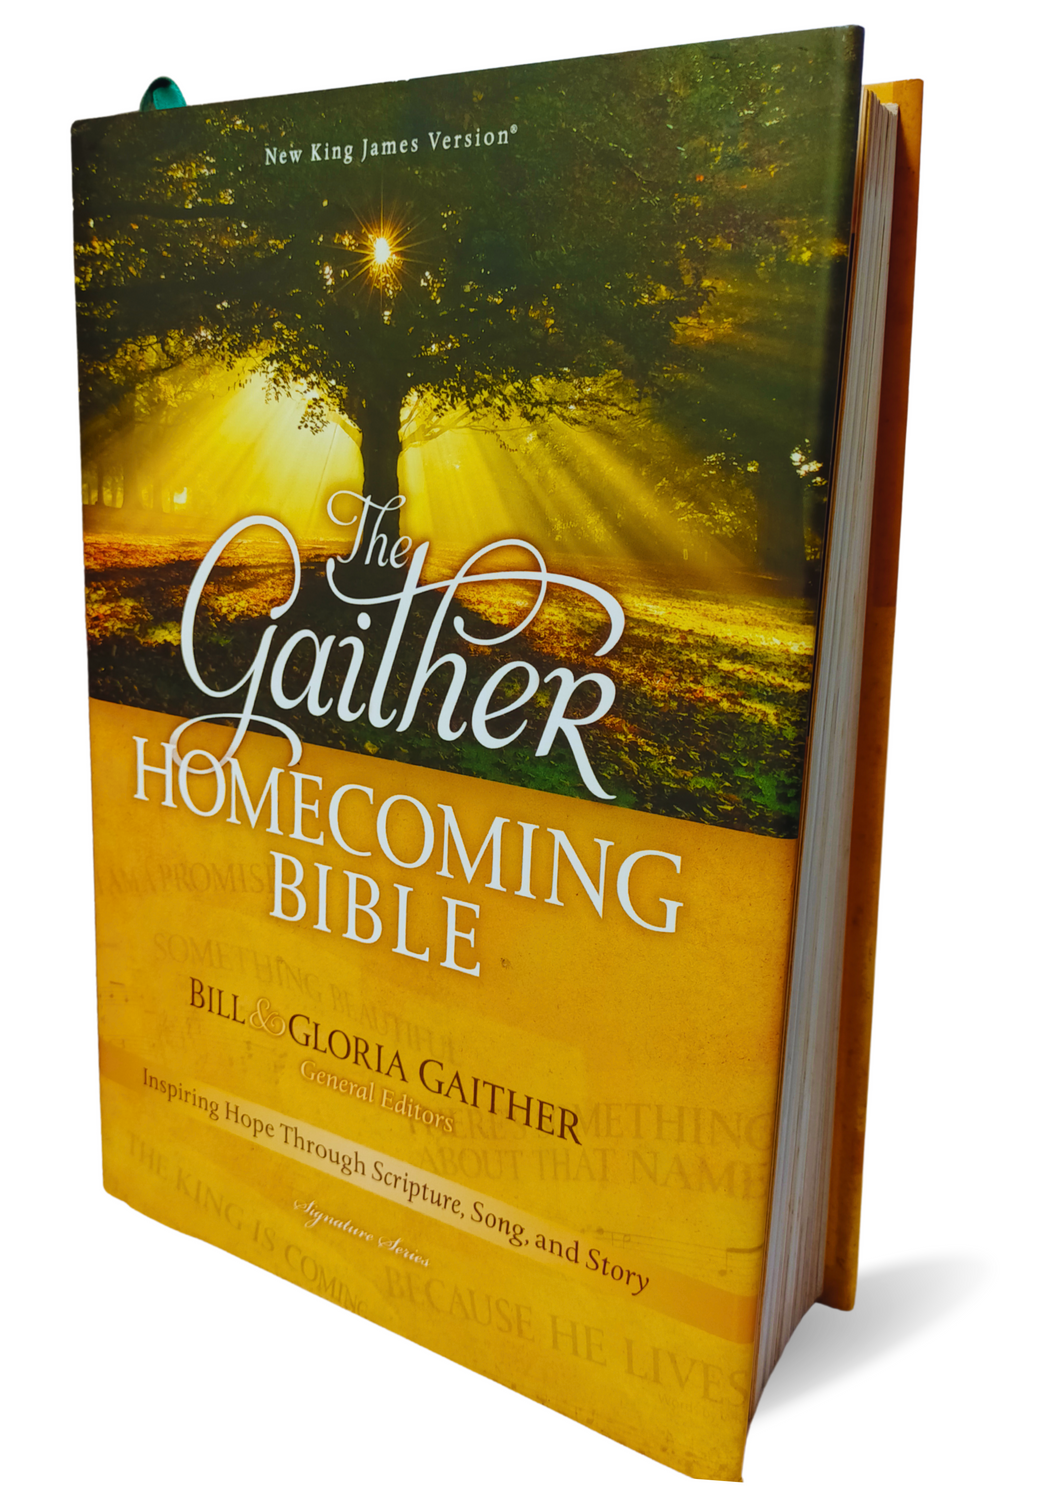 NKJV The Gaither Homecoming Bible Hardcover.